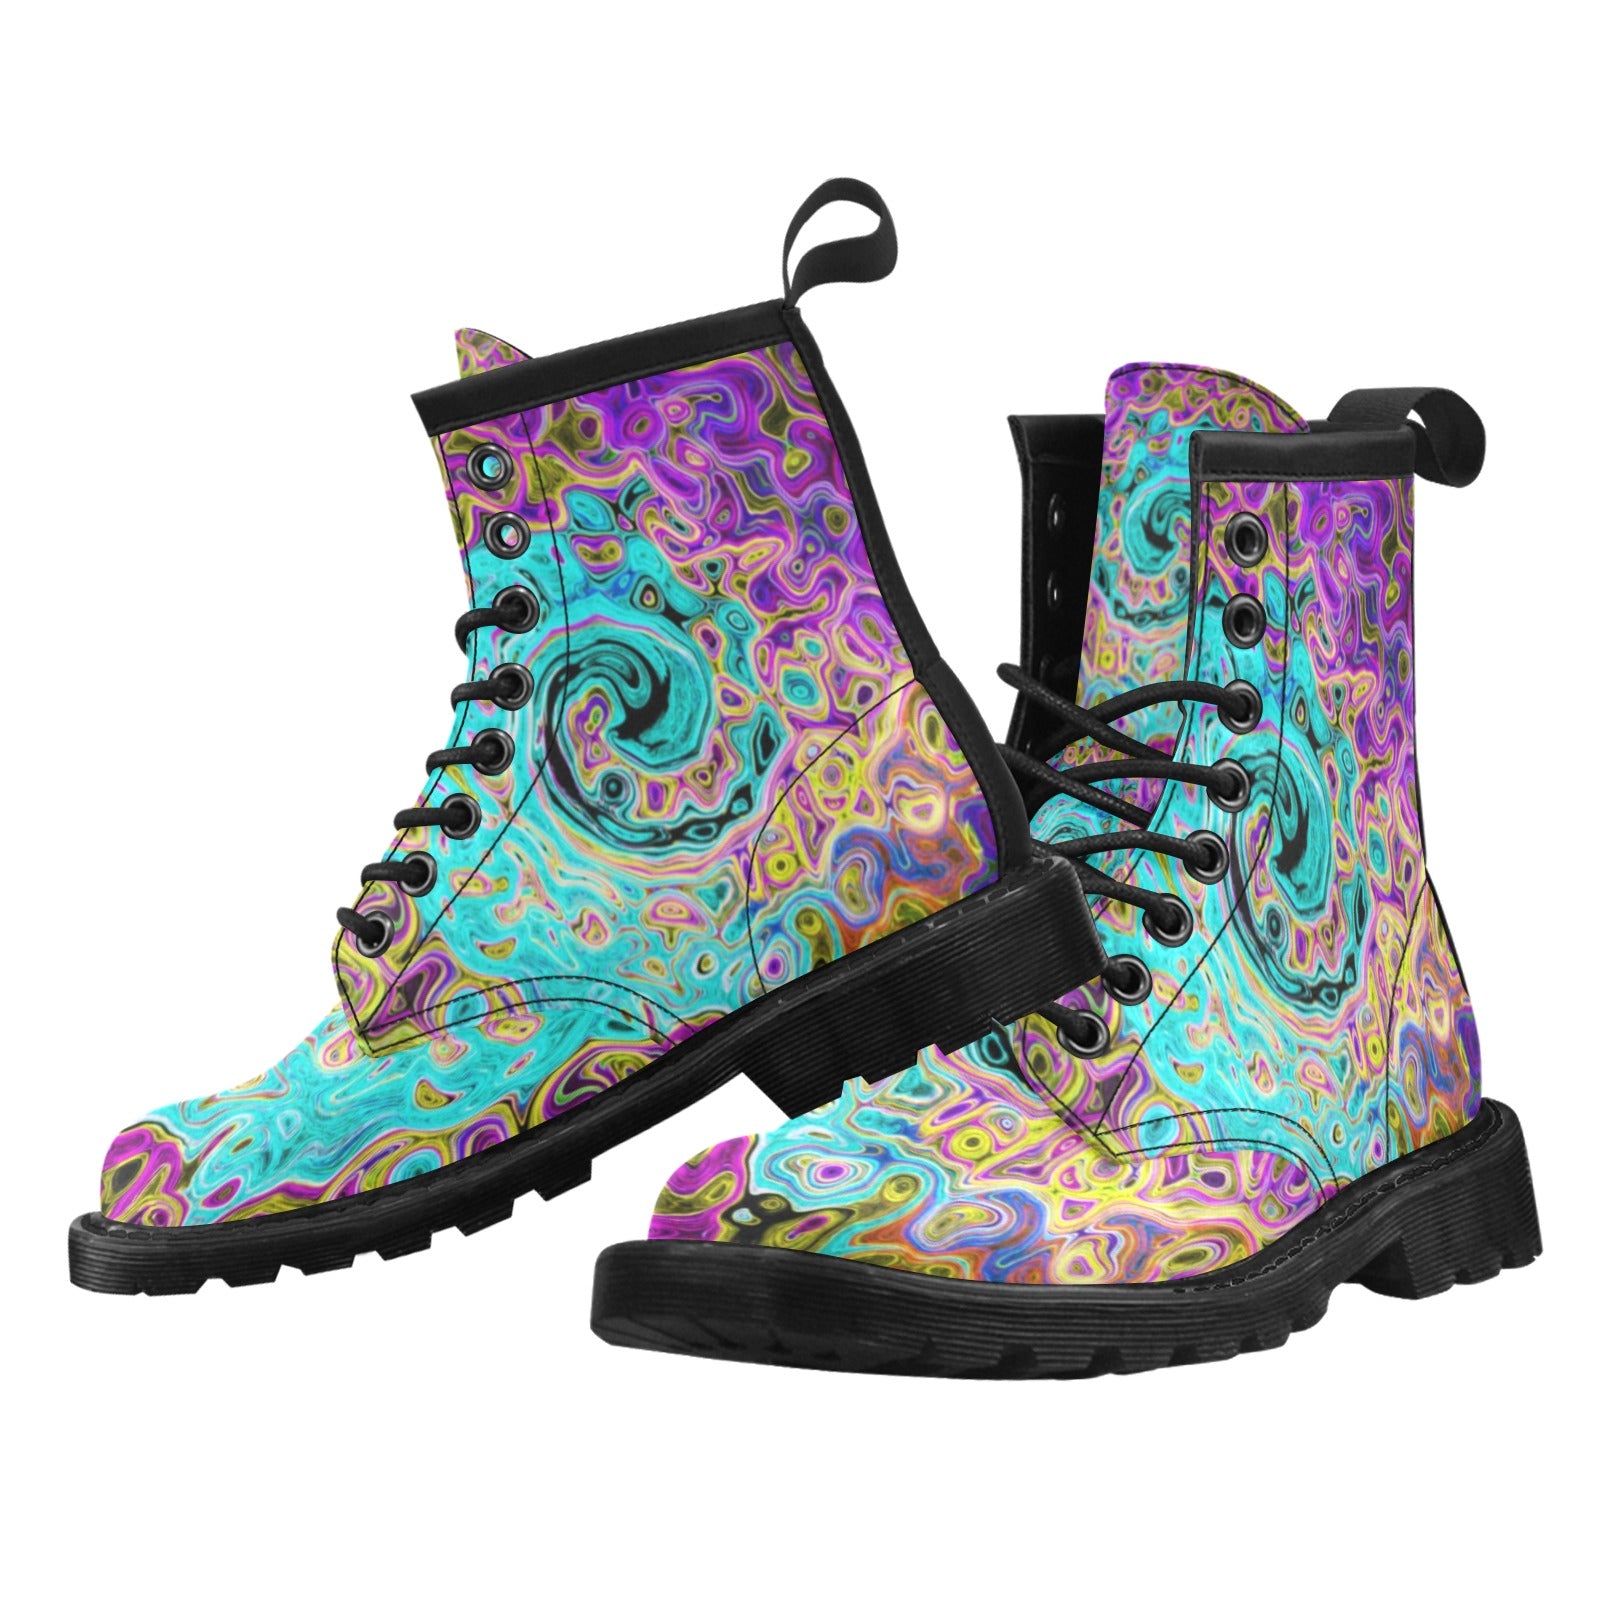 Lace Up Boots for Women - Icy Aqua Blue Groovy Abstract Retro Liquid Swirl